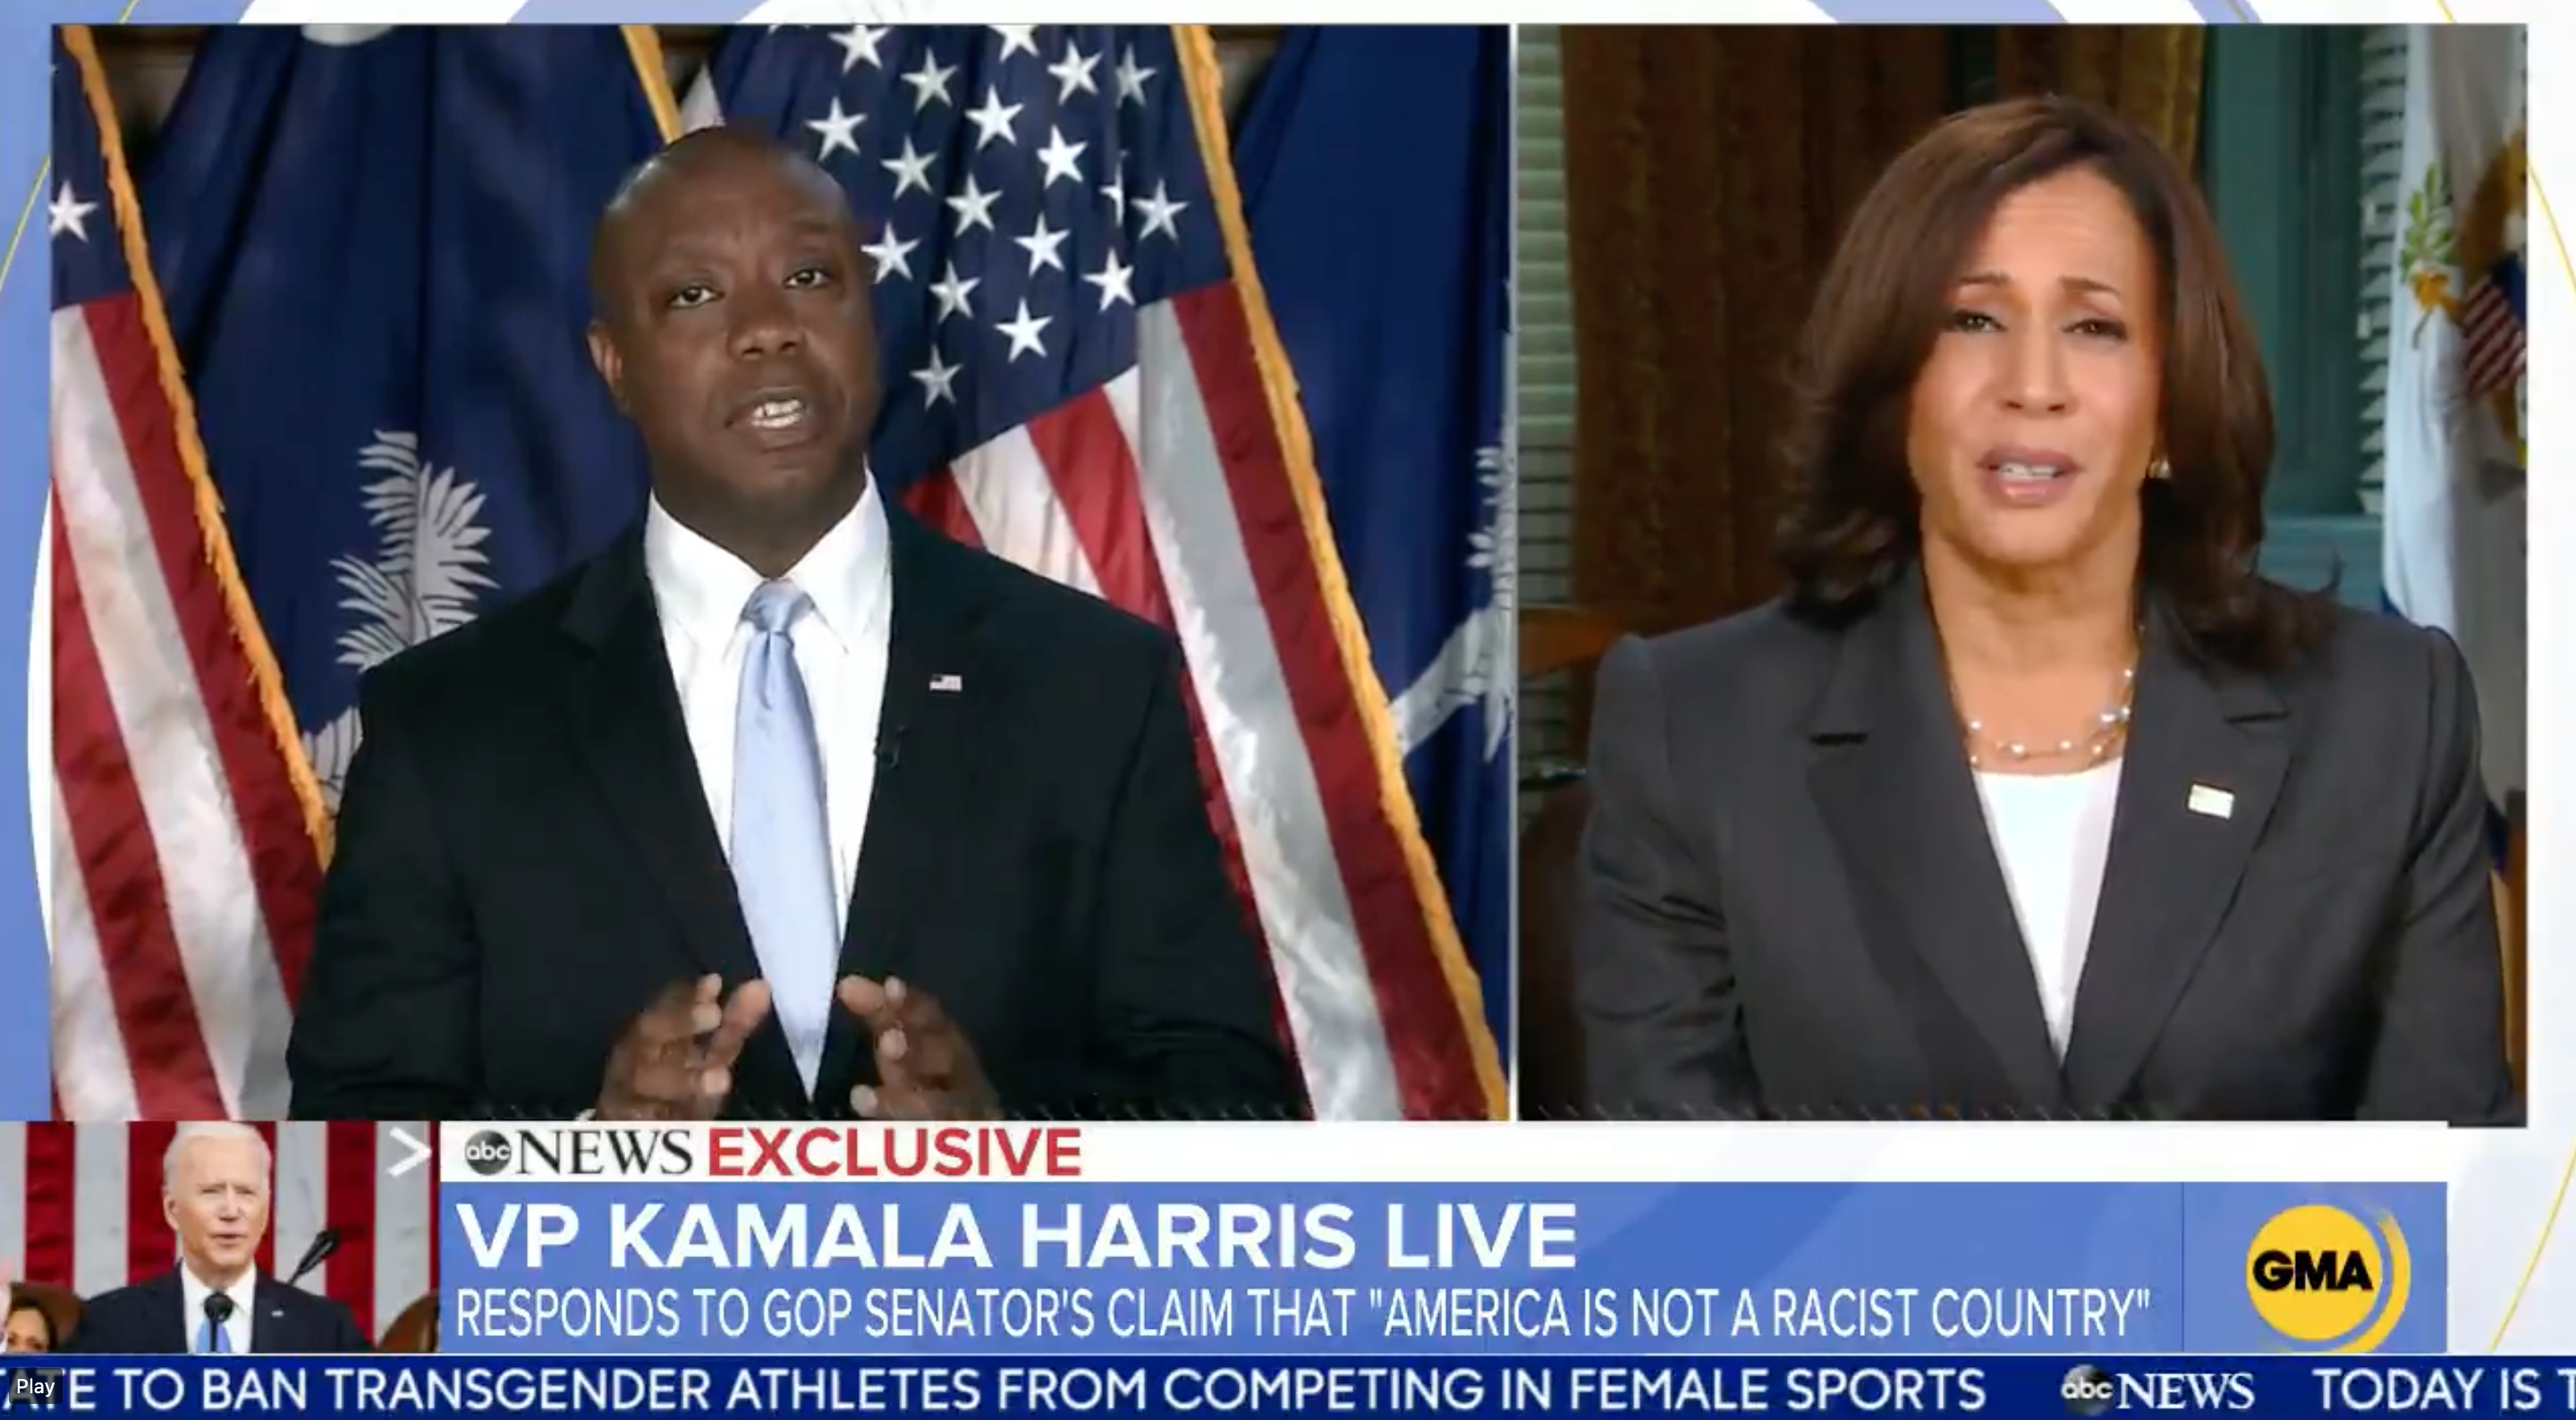 Harris: "We Must Speak Truth About the History of Racism in Our Country"